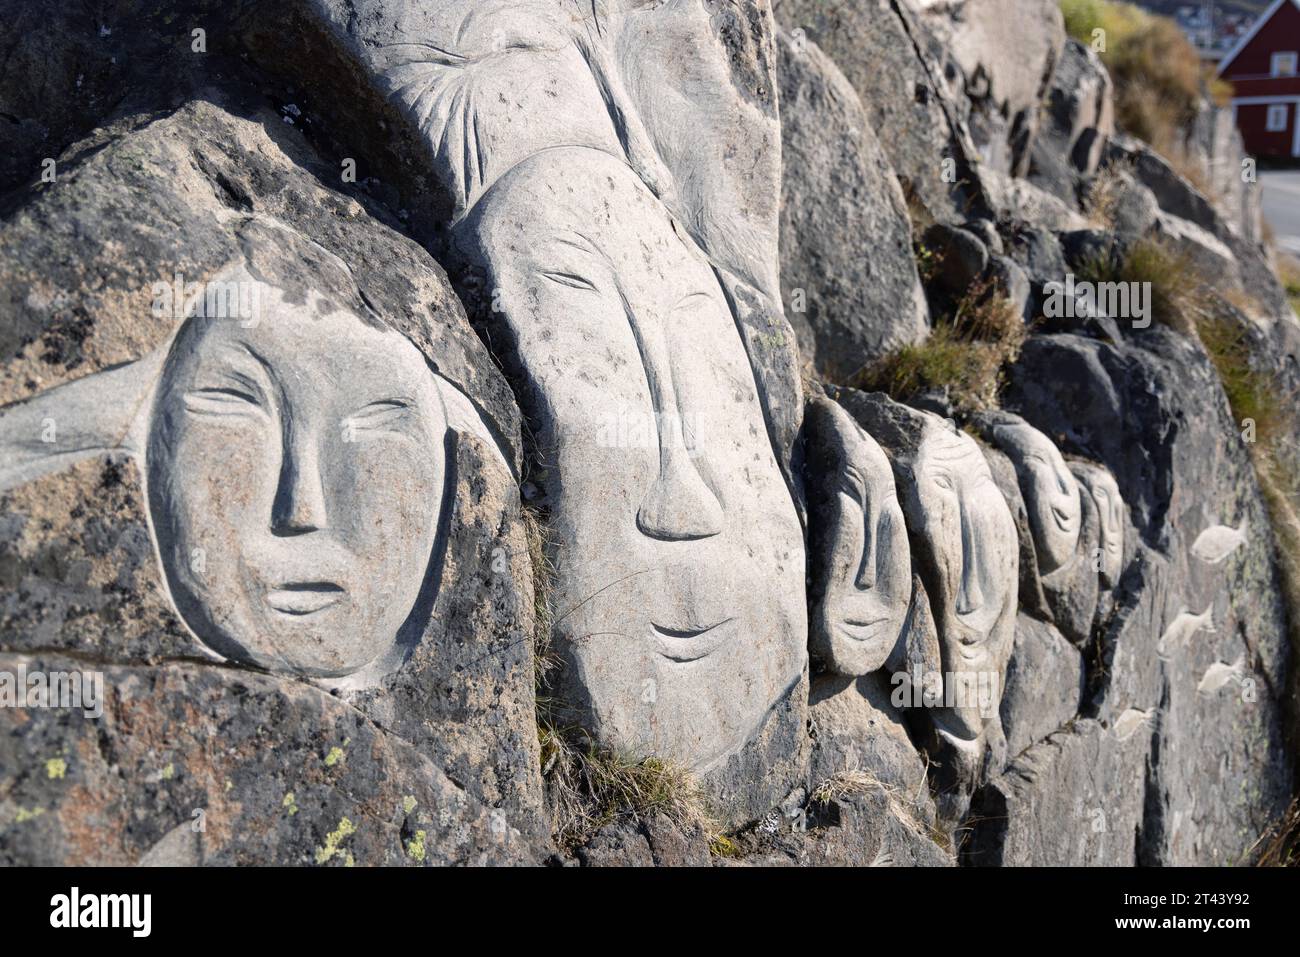 Traditional inuit sculpture; Stone faces, part of the outdoor 'Stone and man' open air gallery of stone sculptures, Qaqortoq, Greenland Arctic Stock Photo